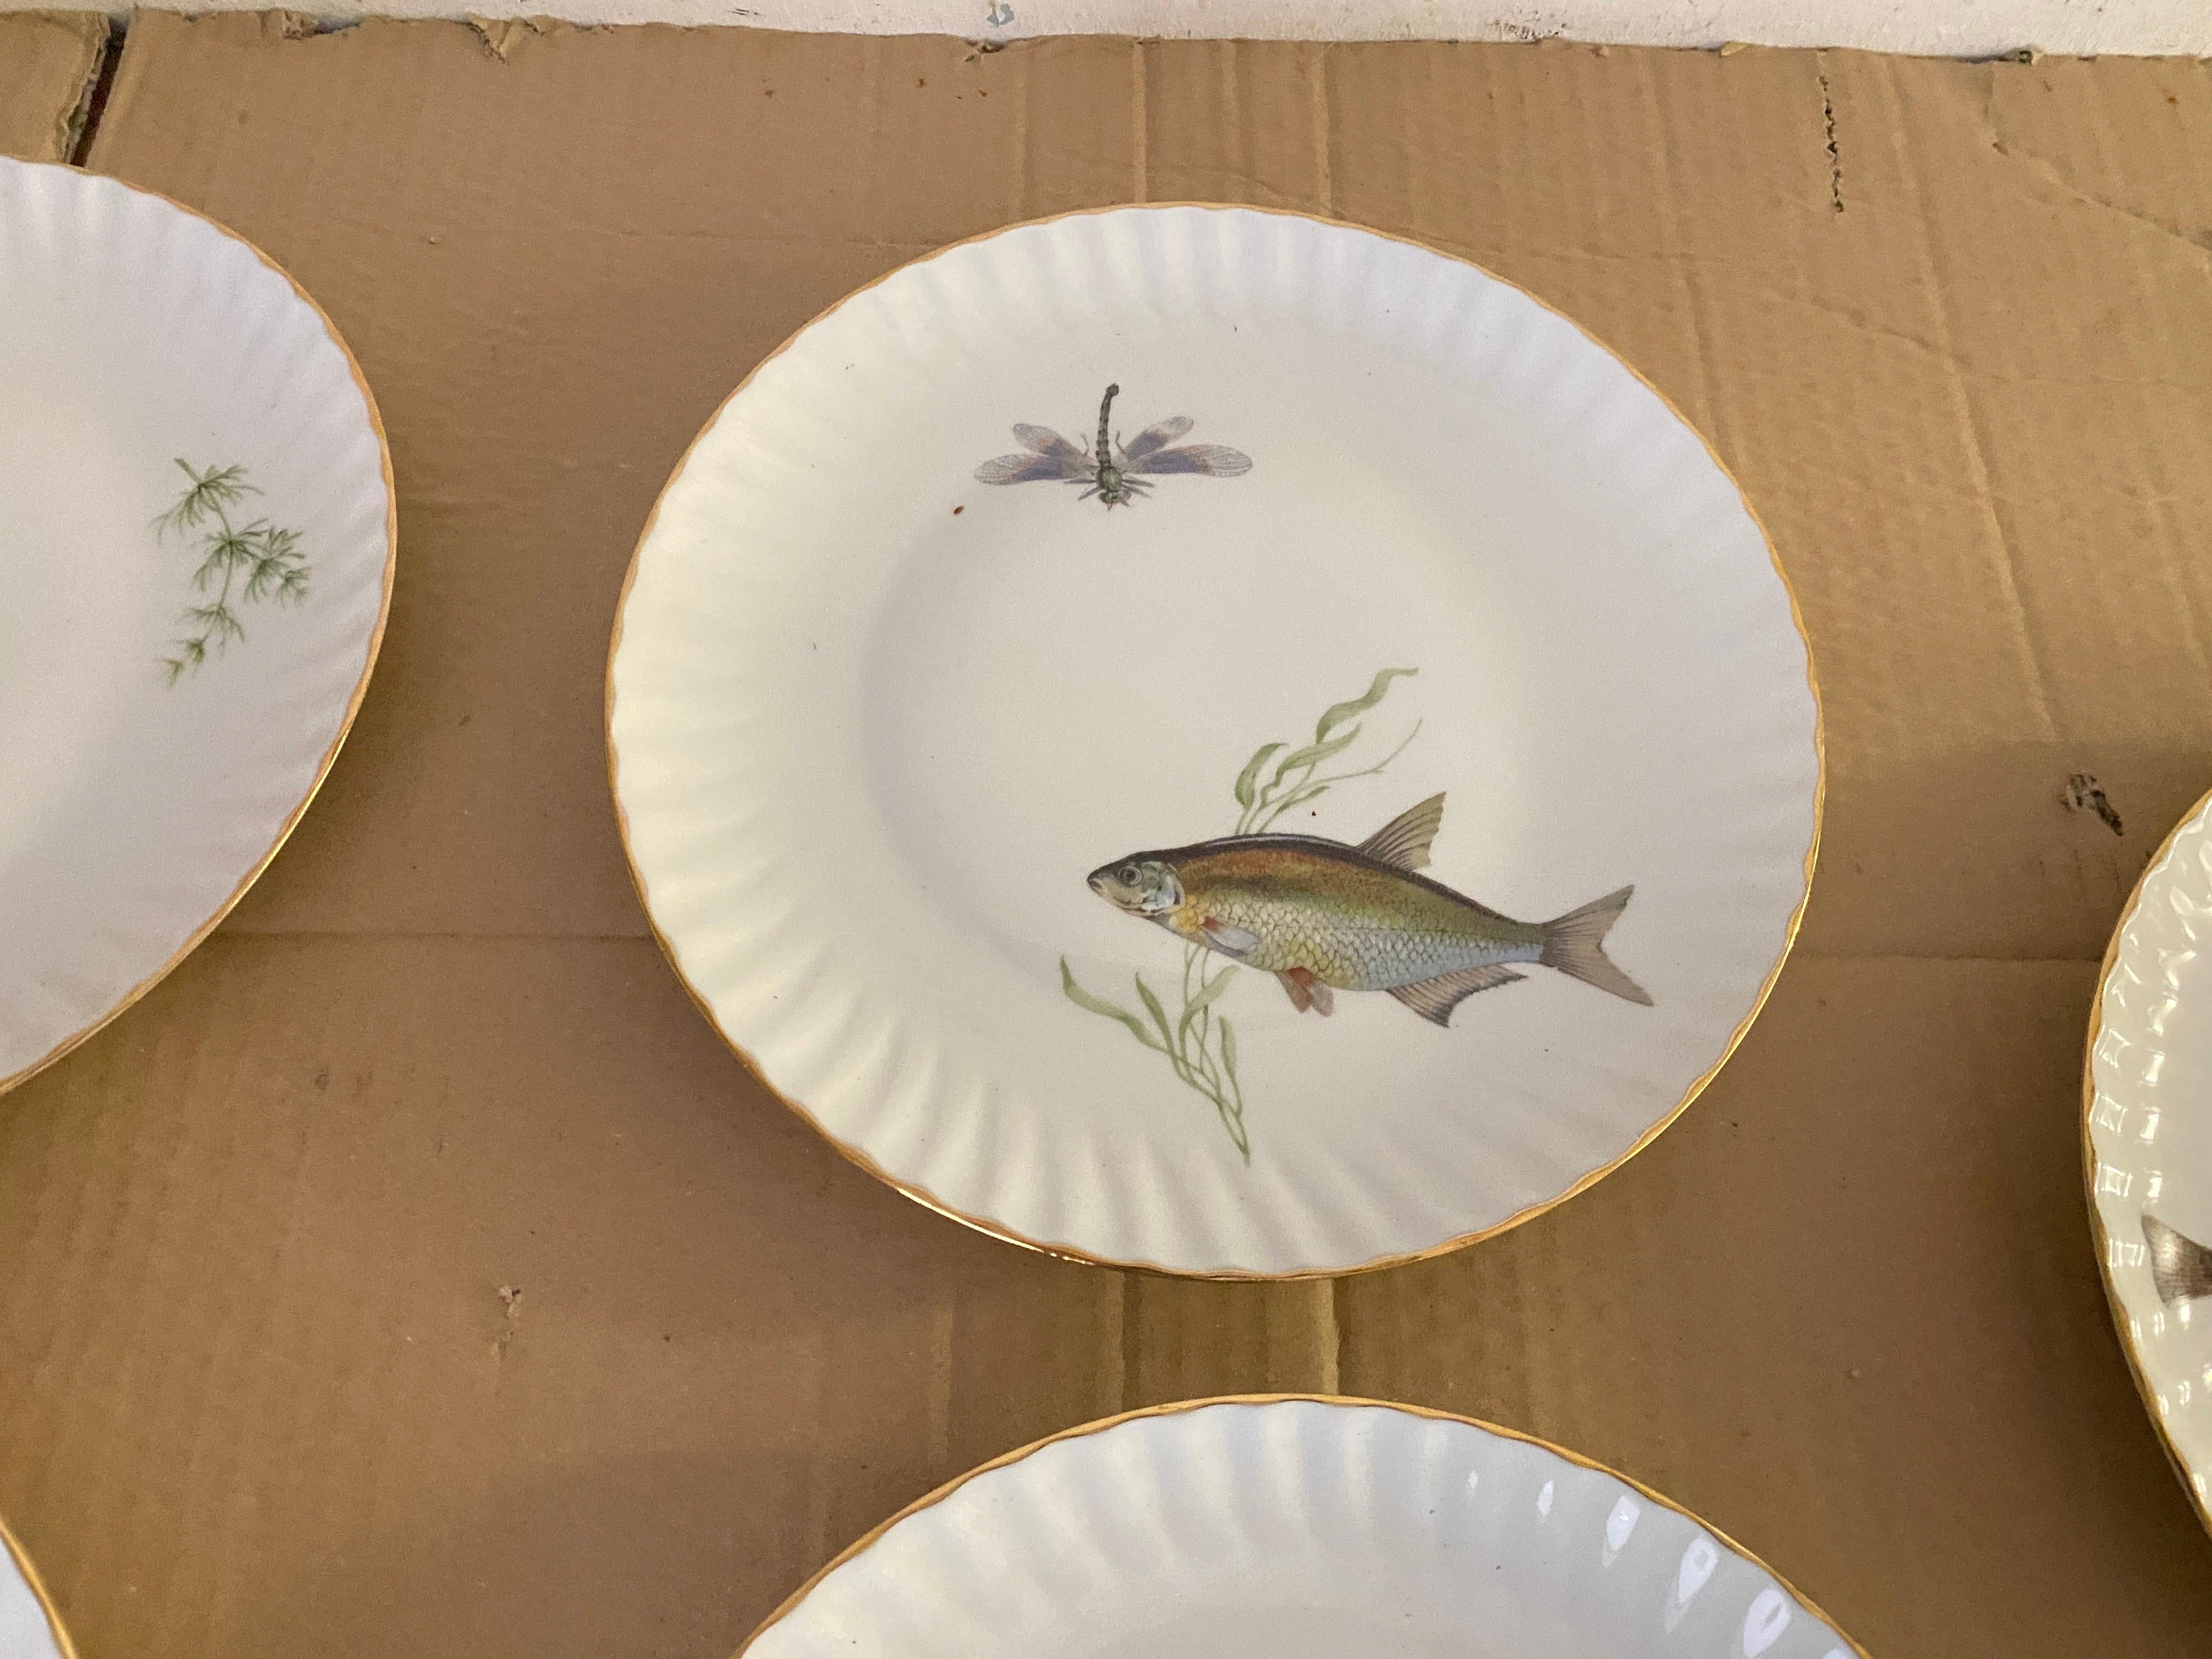 Mid-Century Modern Porcelain Fish Plates by Limoges, France 1